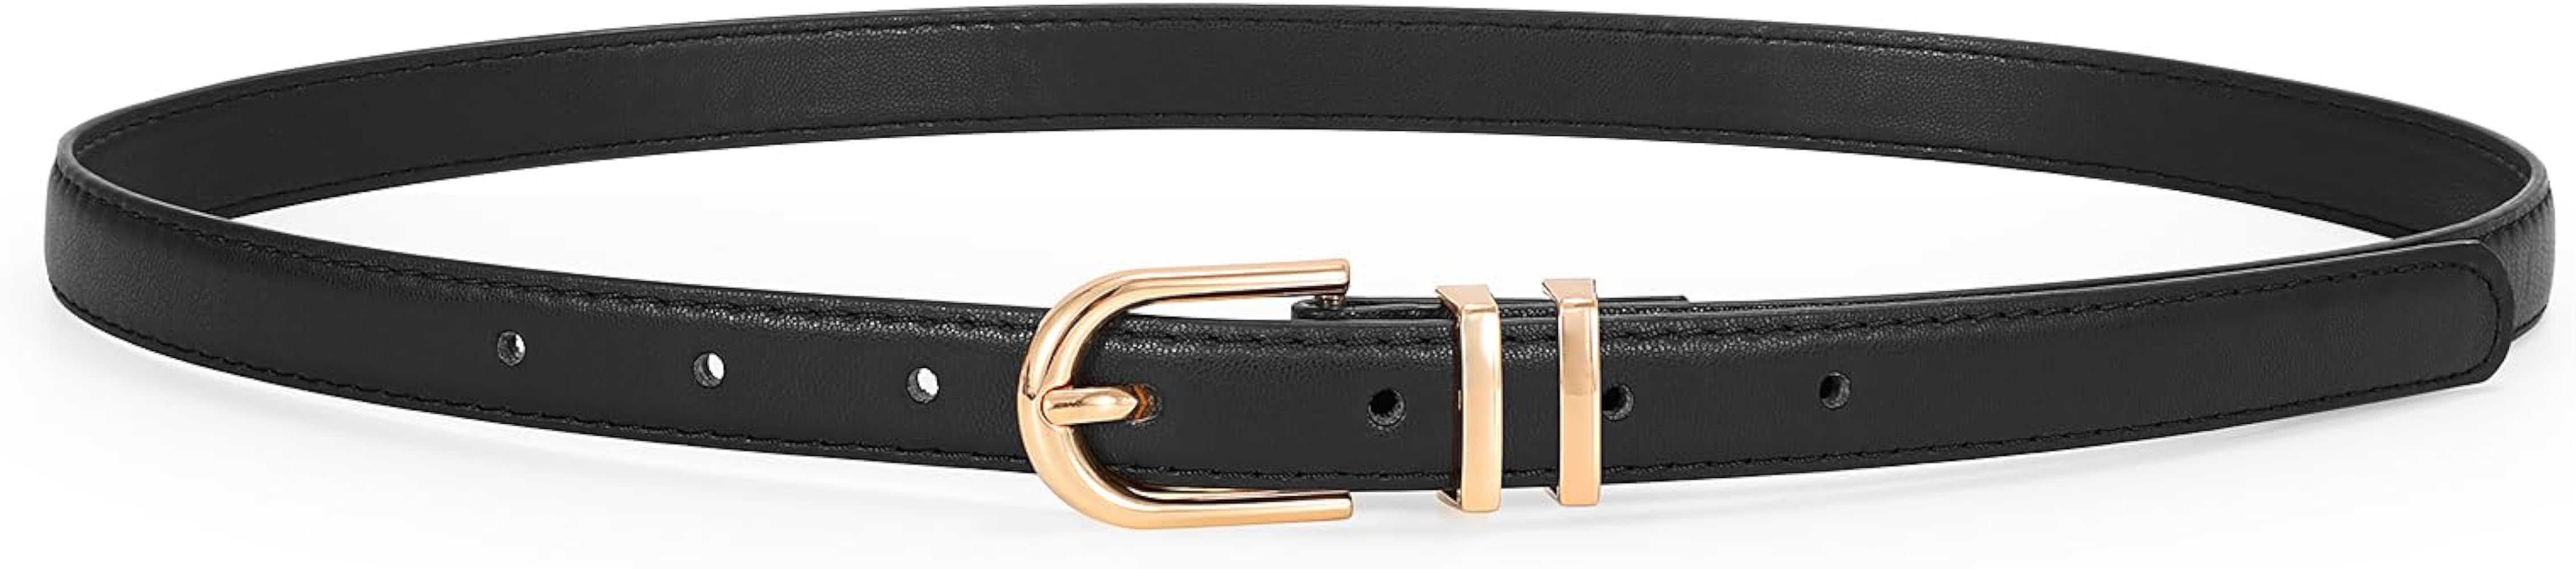 JASGOOD Womens Thin Leather Belt Skinny Faux Leather Belt for Jeans Dress with Gold Alloy Buckle | Amazon (US)